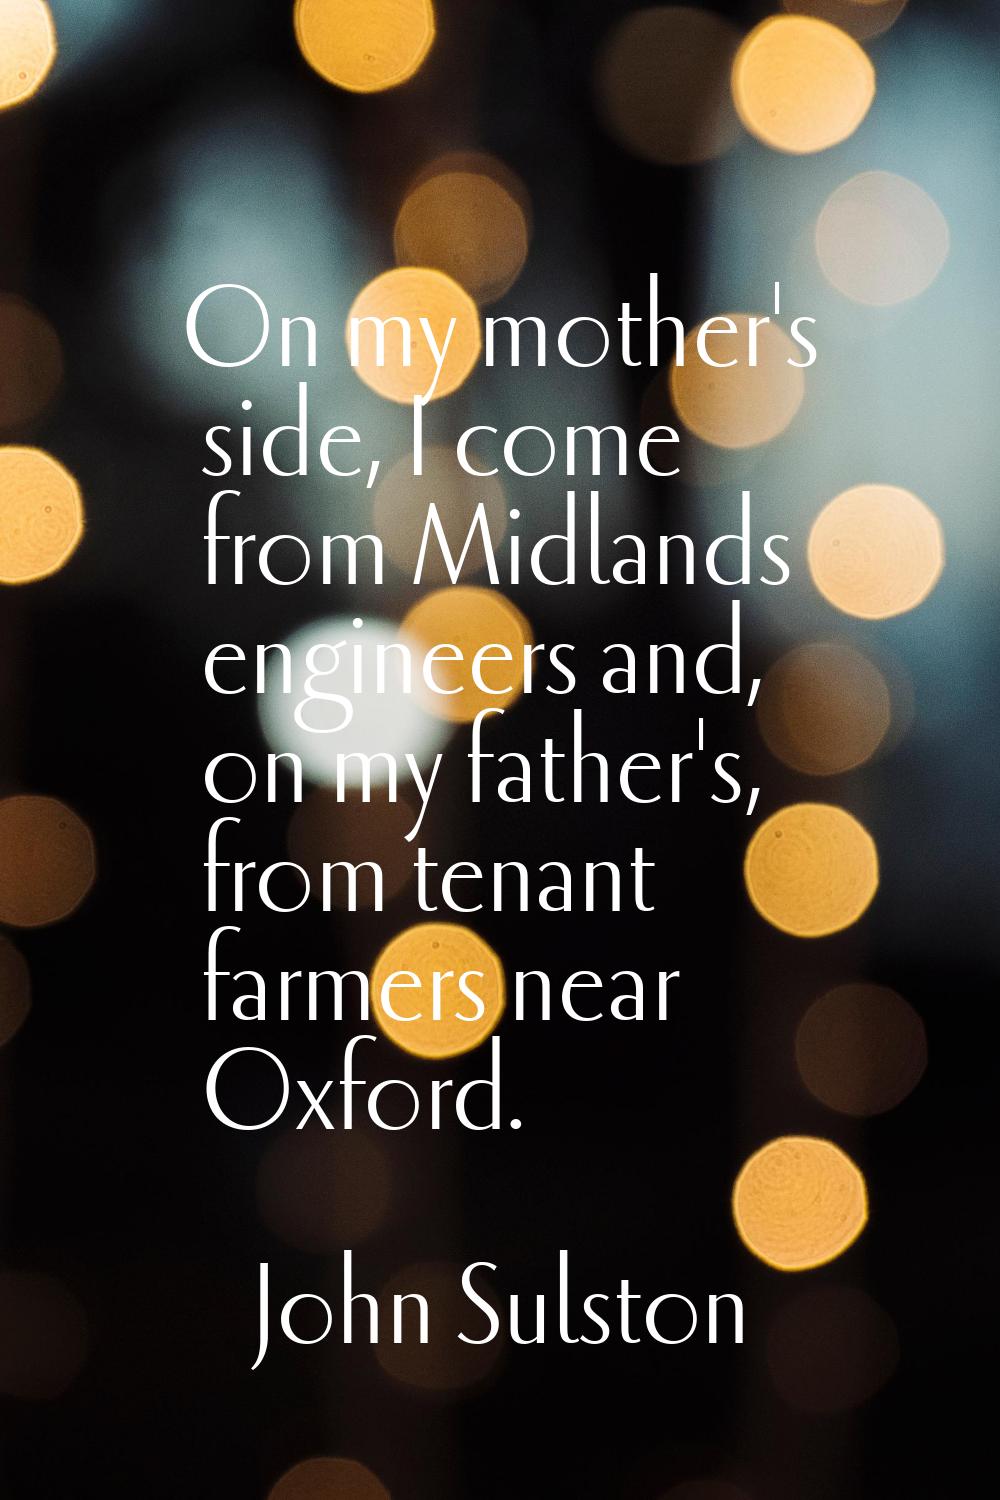 On my mother's side, I come from Midlands engineers and, on my father's, from tenant farmers near O